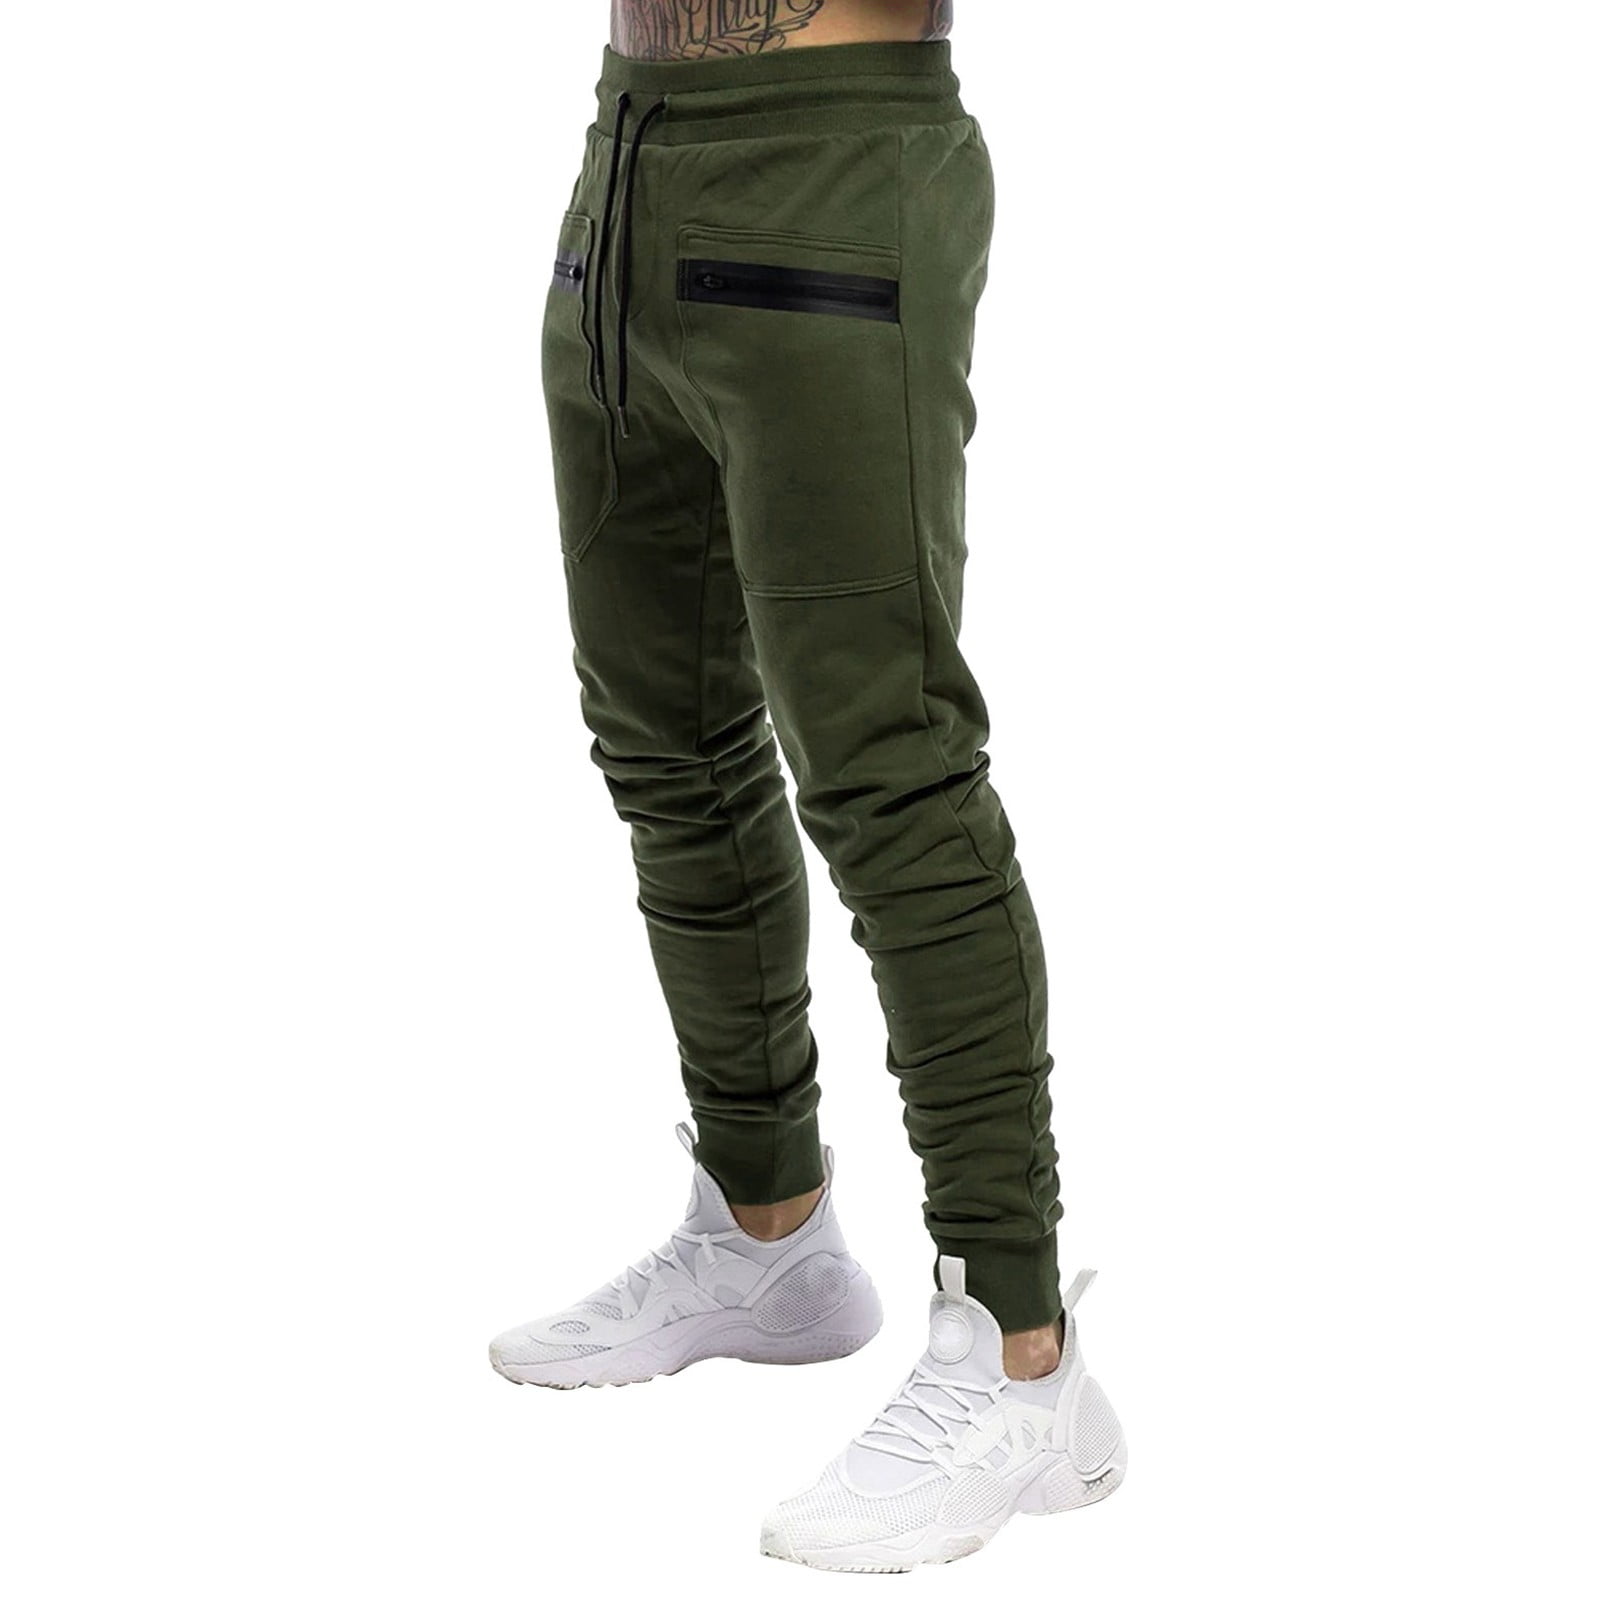 Outfmvch joggers for men Jogging Bottoms Sports Sweat Training pants ...